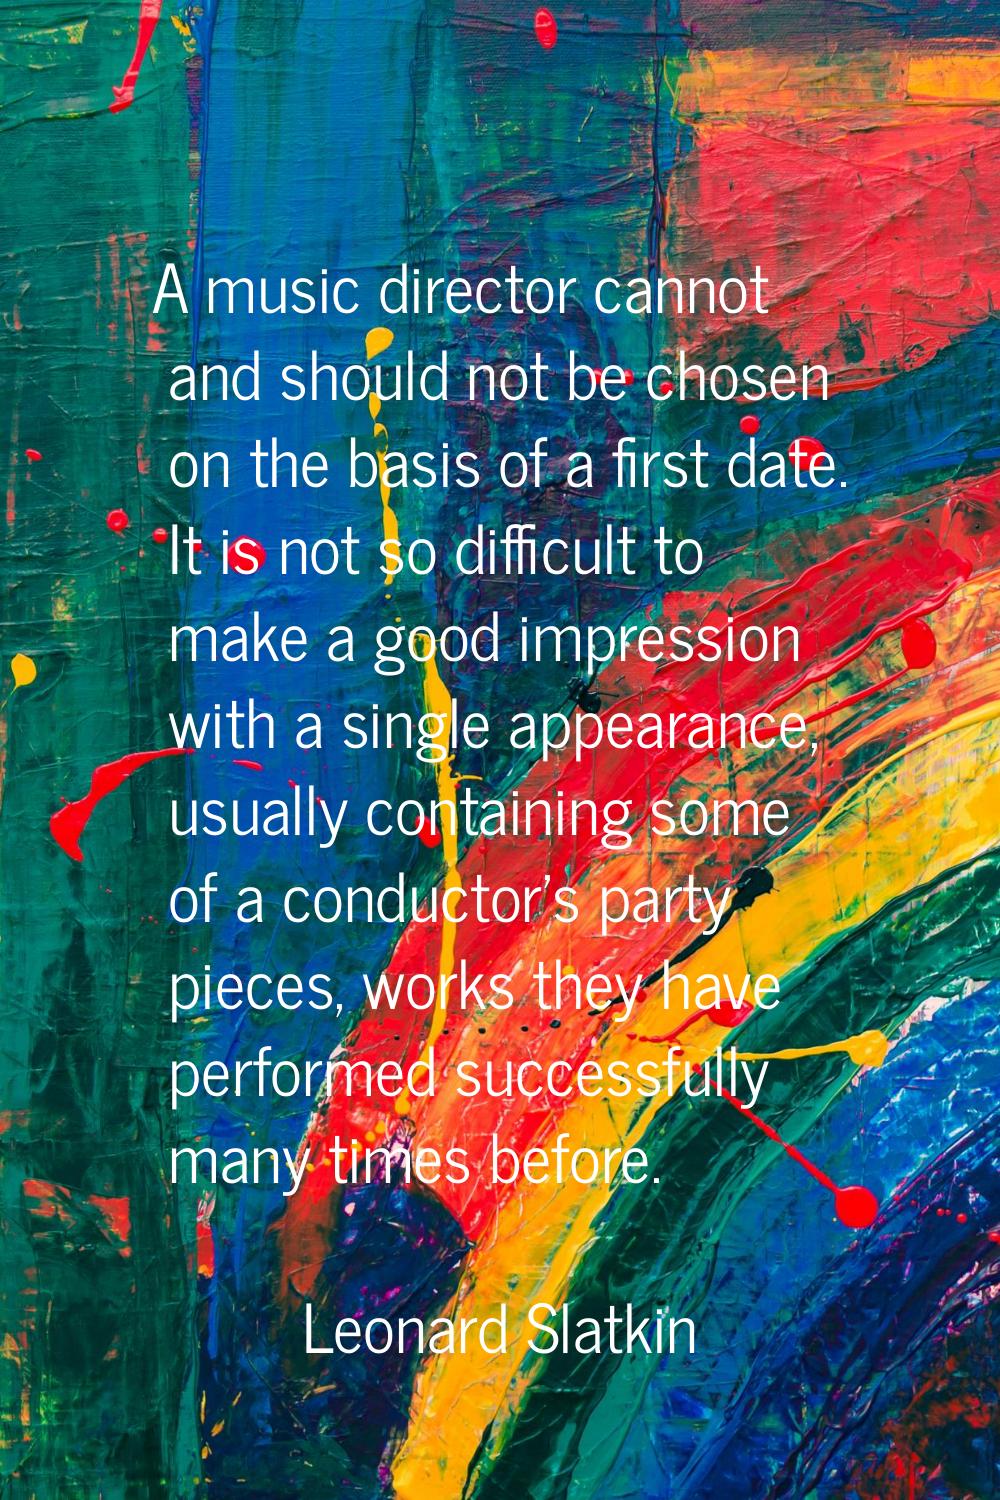 A music director cannot and should not be chosen on the basis of a first date. It is not so difficu